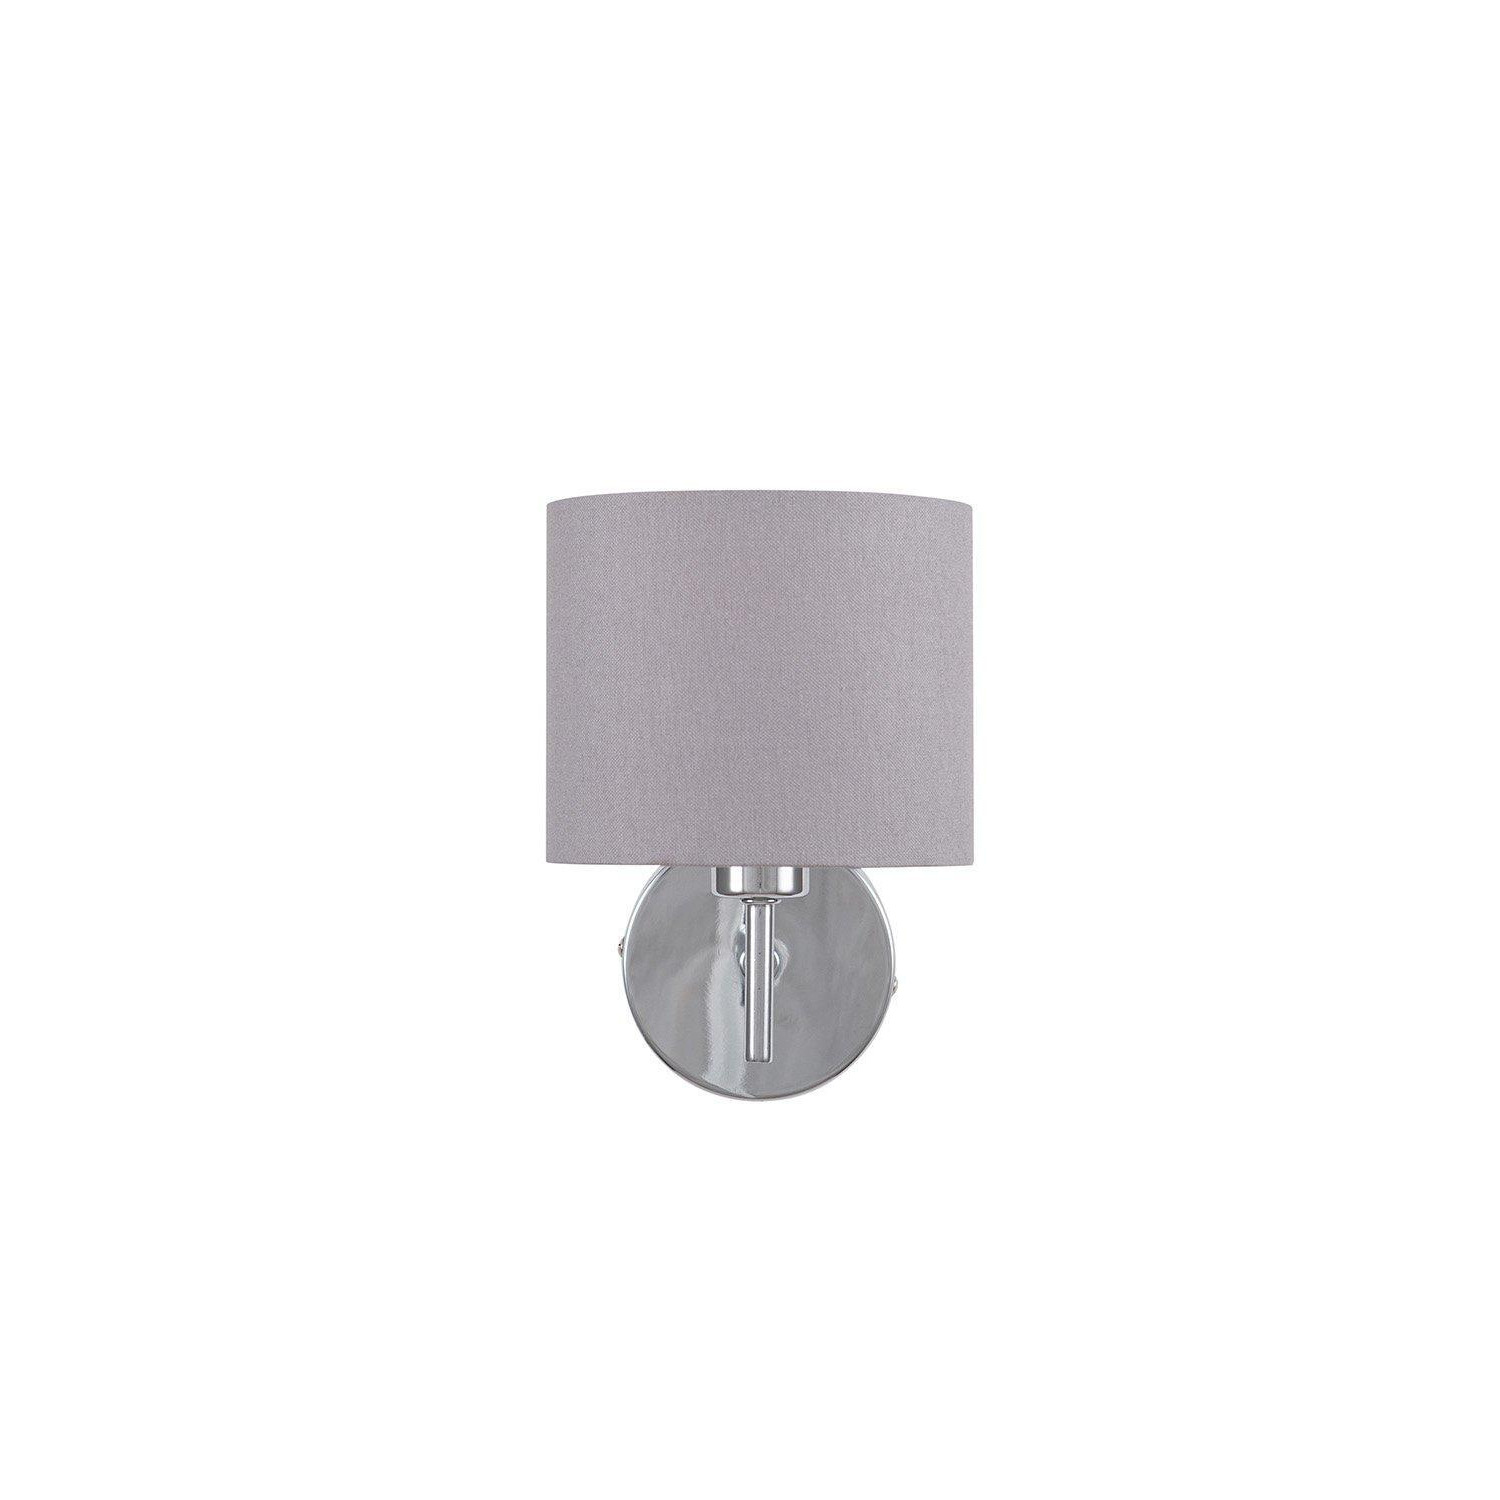 Silver Metal Straight Arm Linen Shade Wall Light - image 1